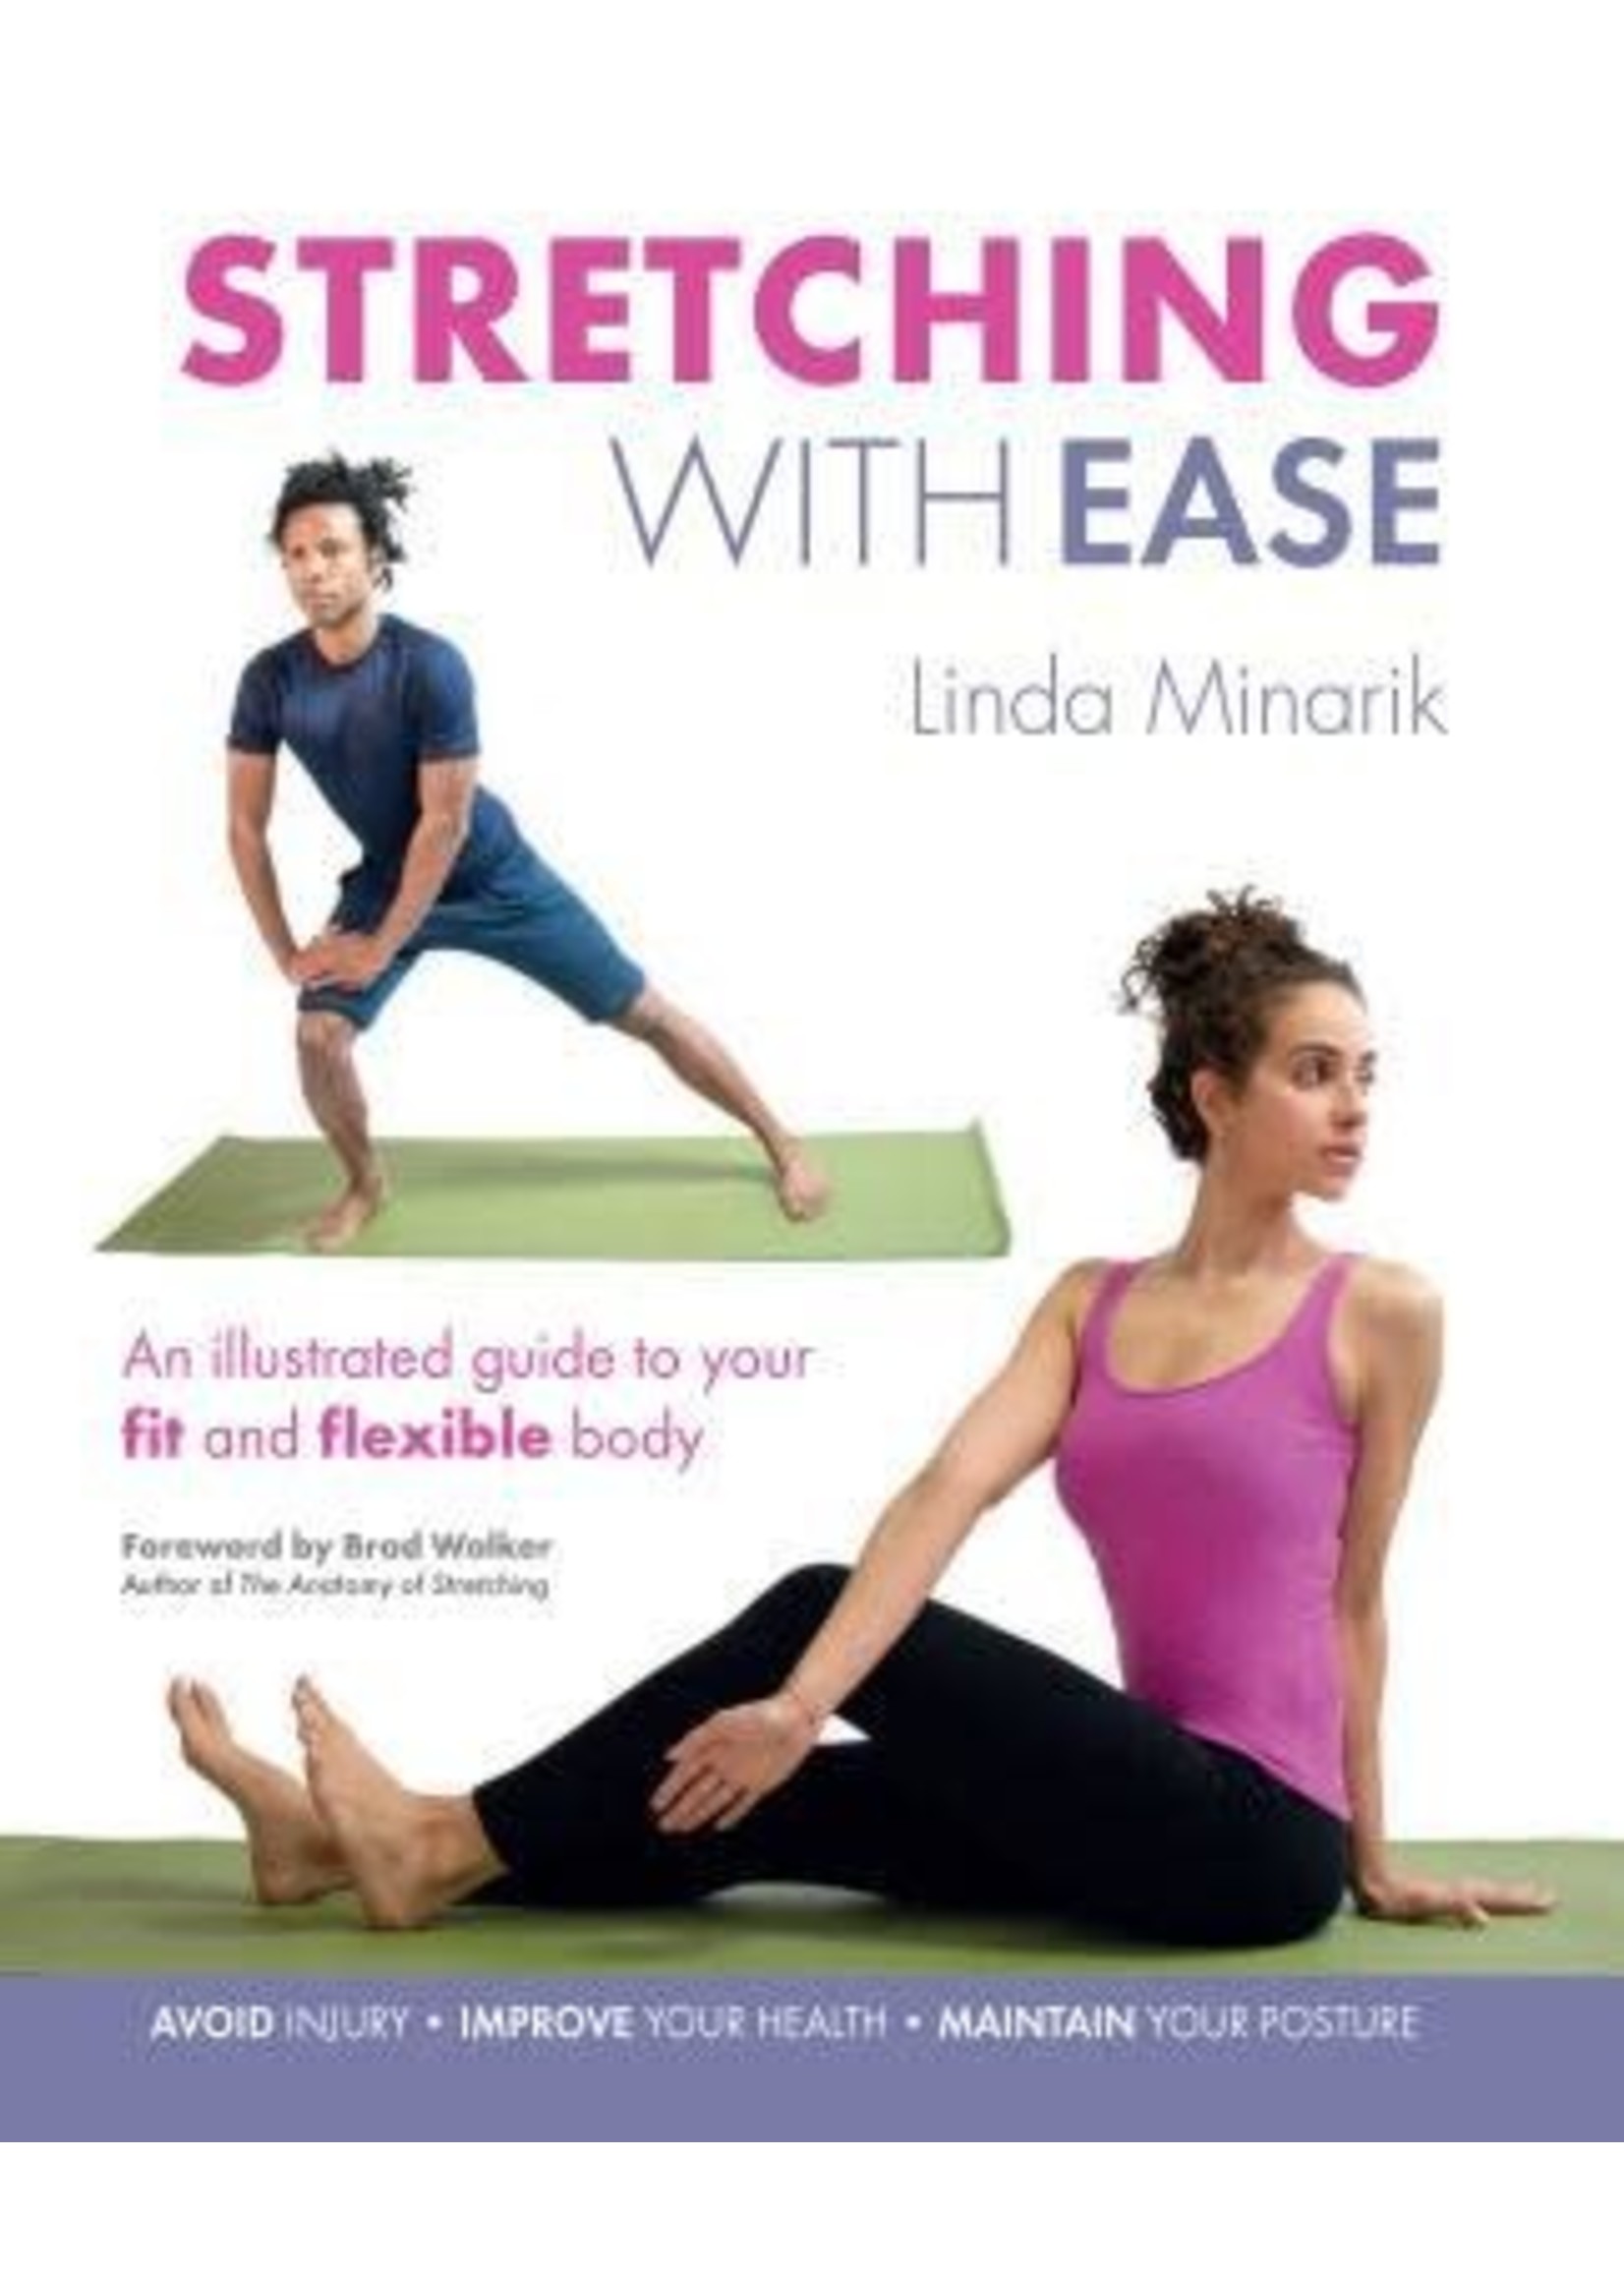 Stretching with Ease: An Illustrated Guide To Your Fit And Flexible Body by Linda Minarik